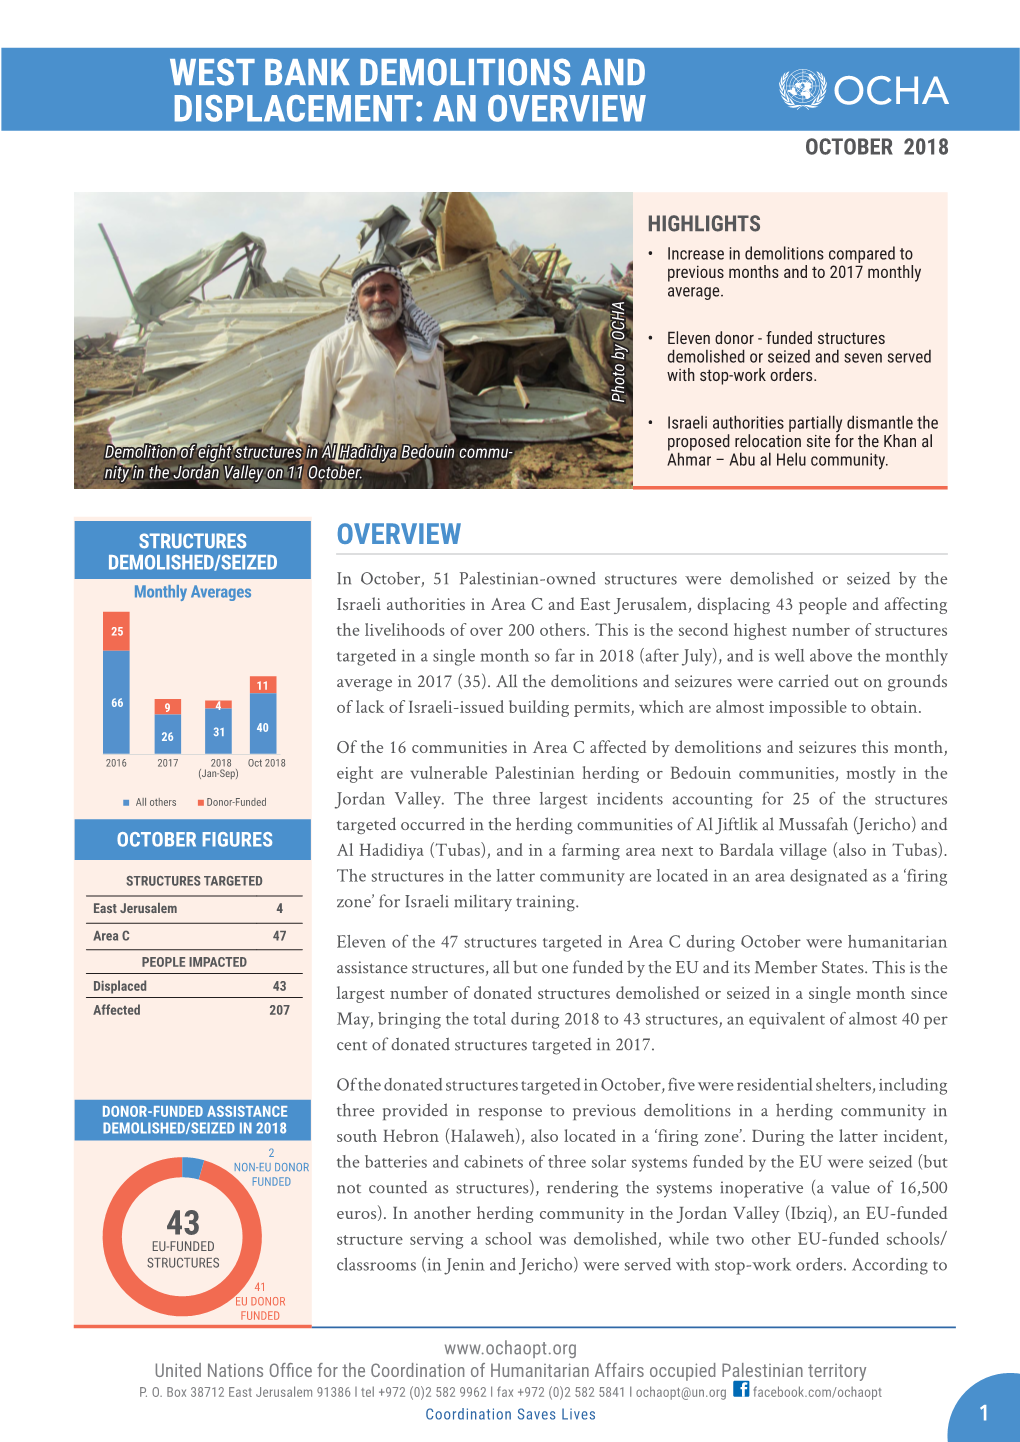 West Bank Demolitions and Displacement: an Overview October 2018